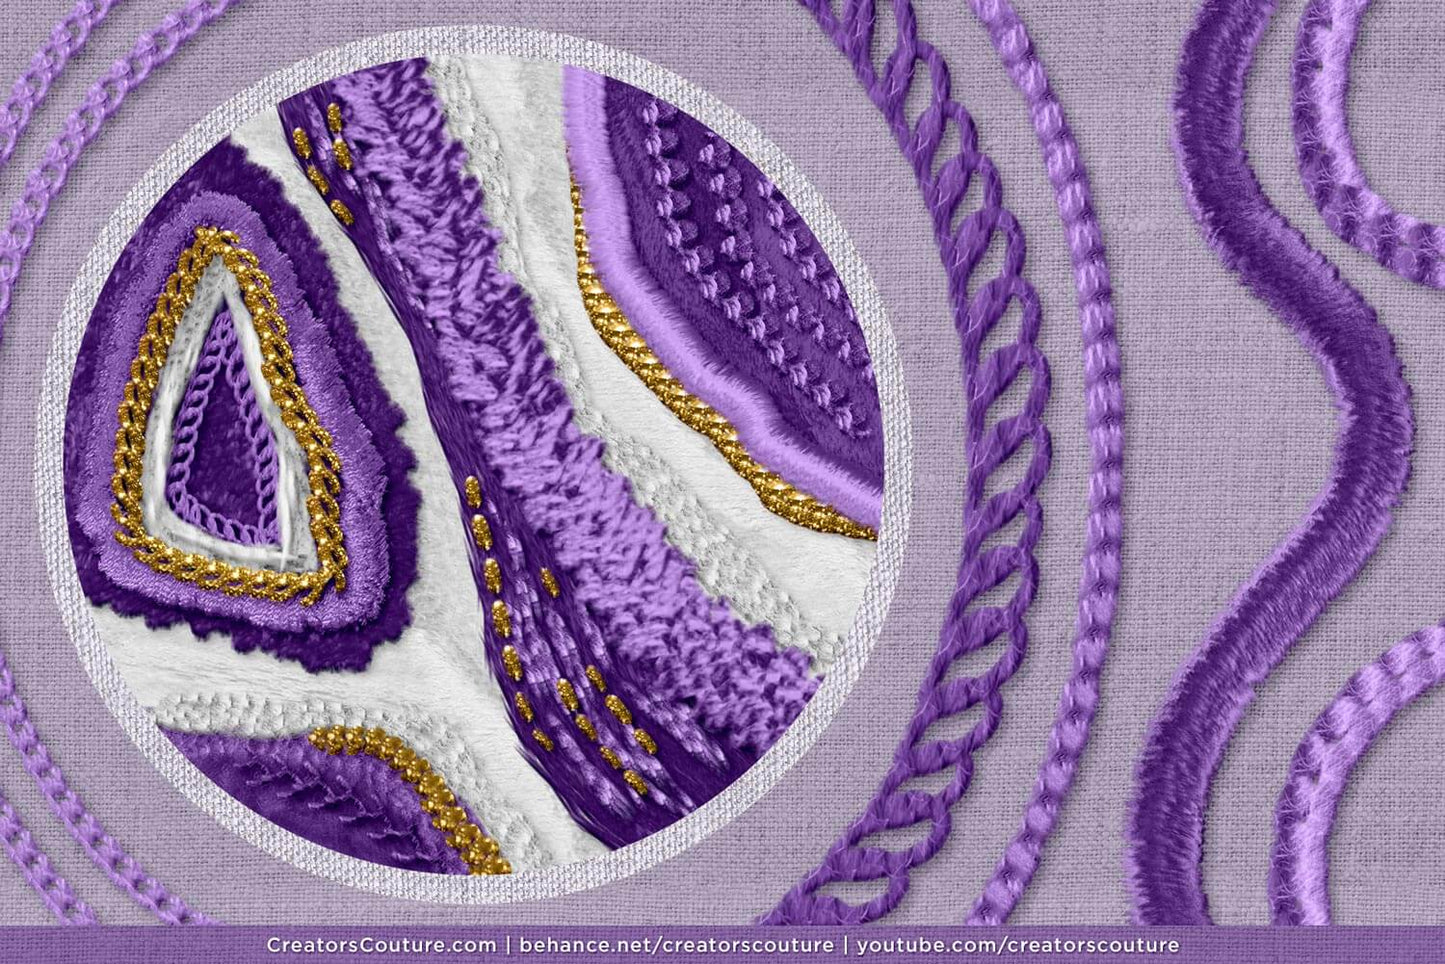 illustration created in photoshop that gives illusion of hand embroidery of a geode artwork